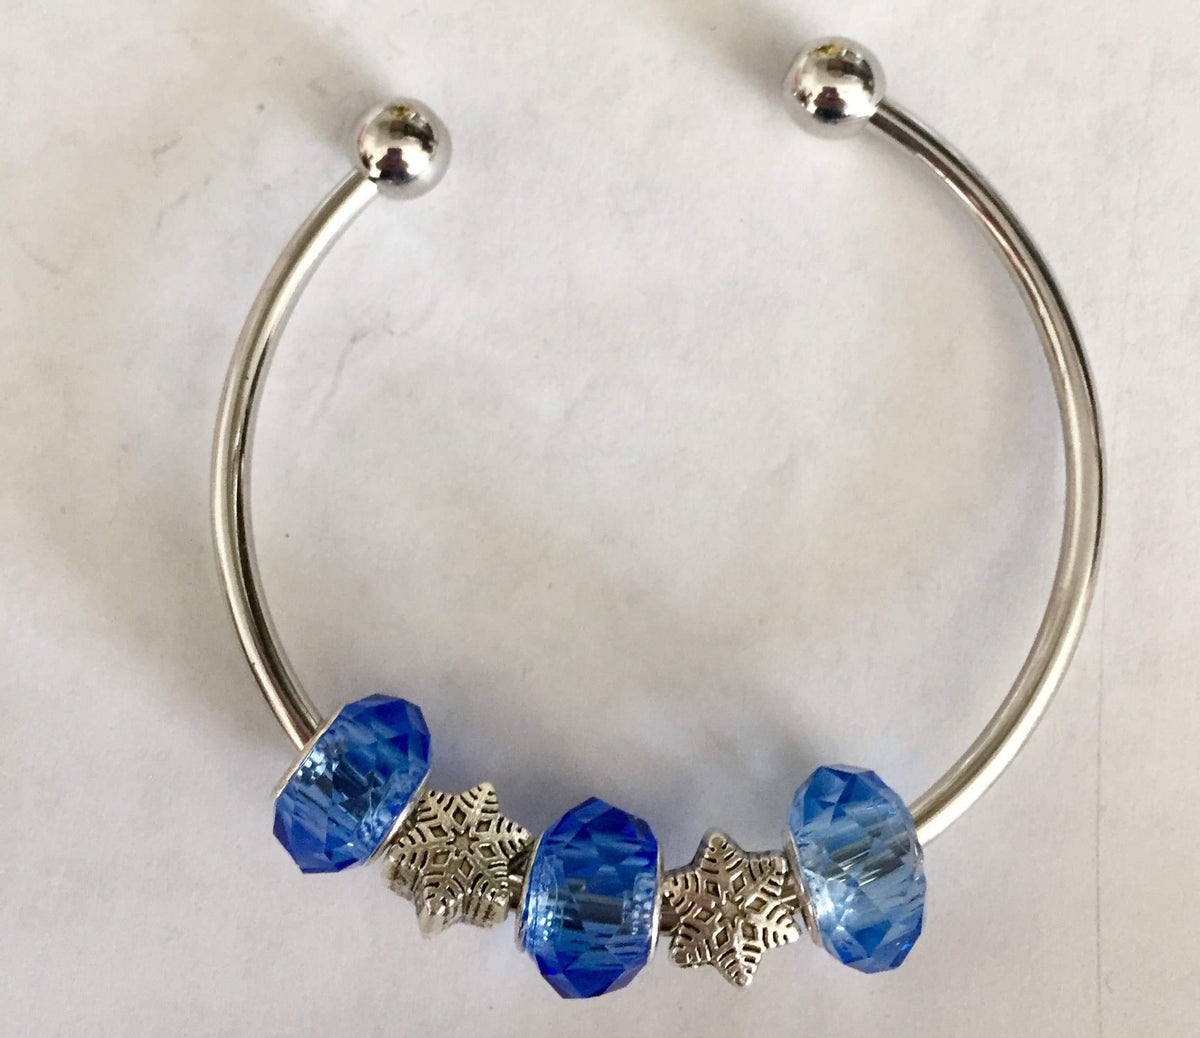 Snowflake and Blue Charms Bangle Bracelet - The House of Awareness